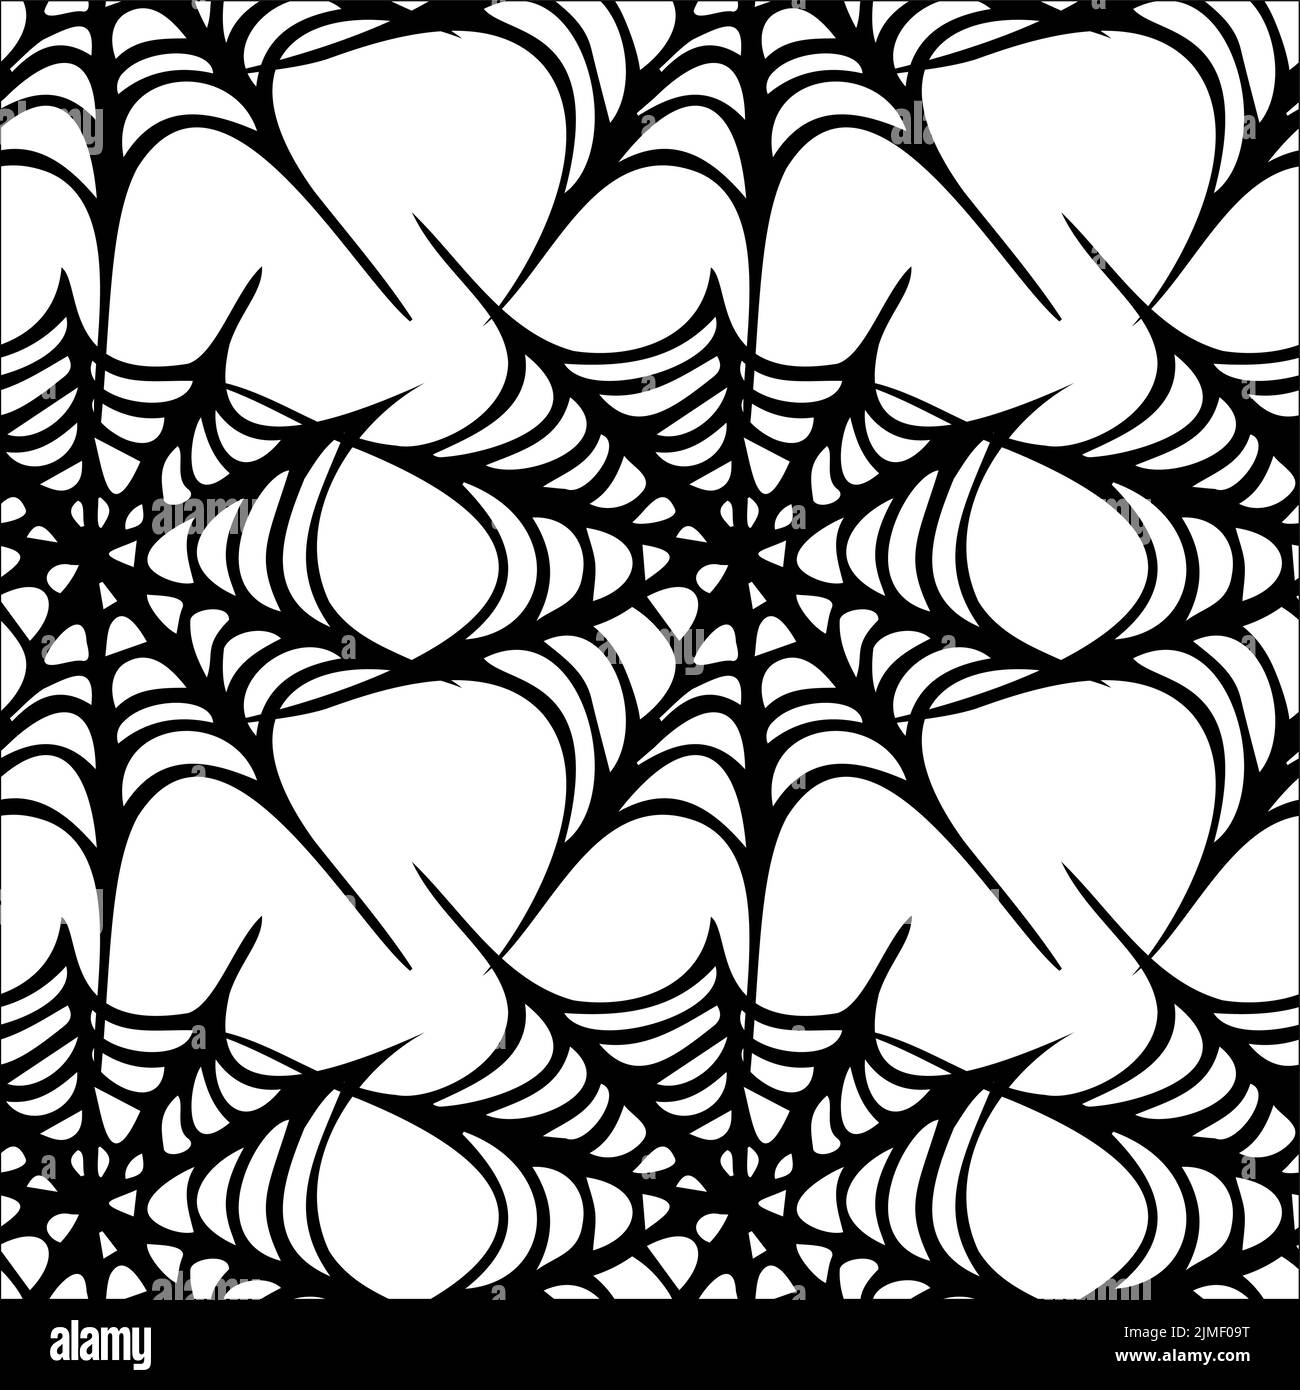 Spider web seamless pattern , black and white style Stock Vector